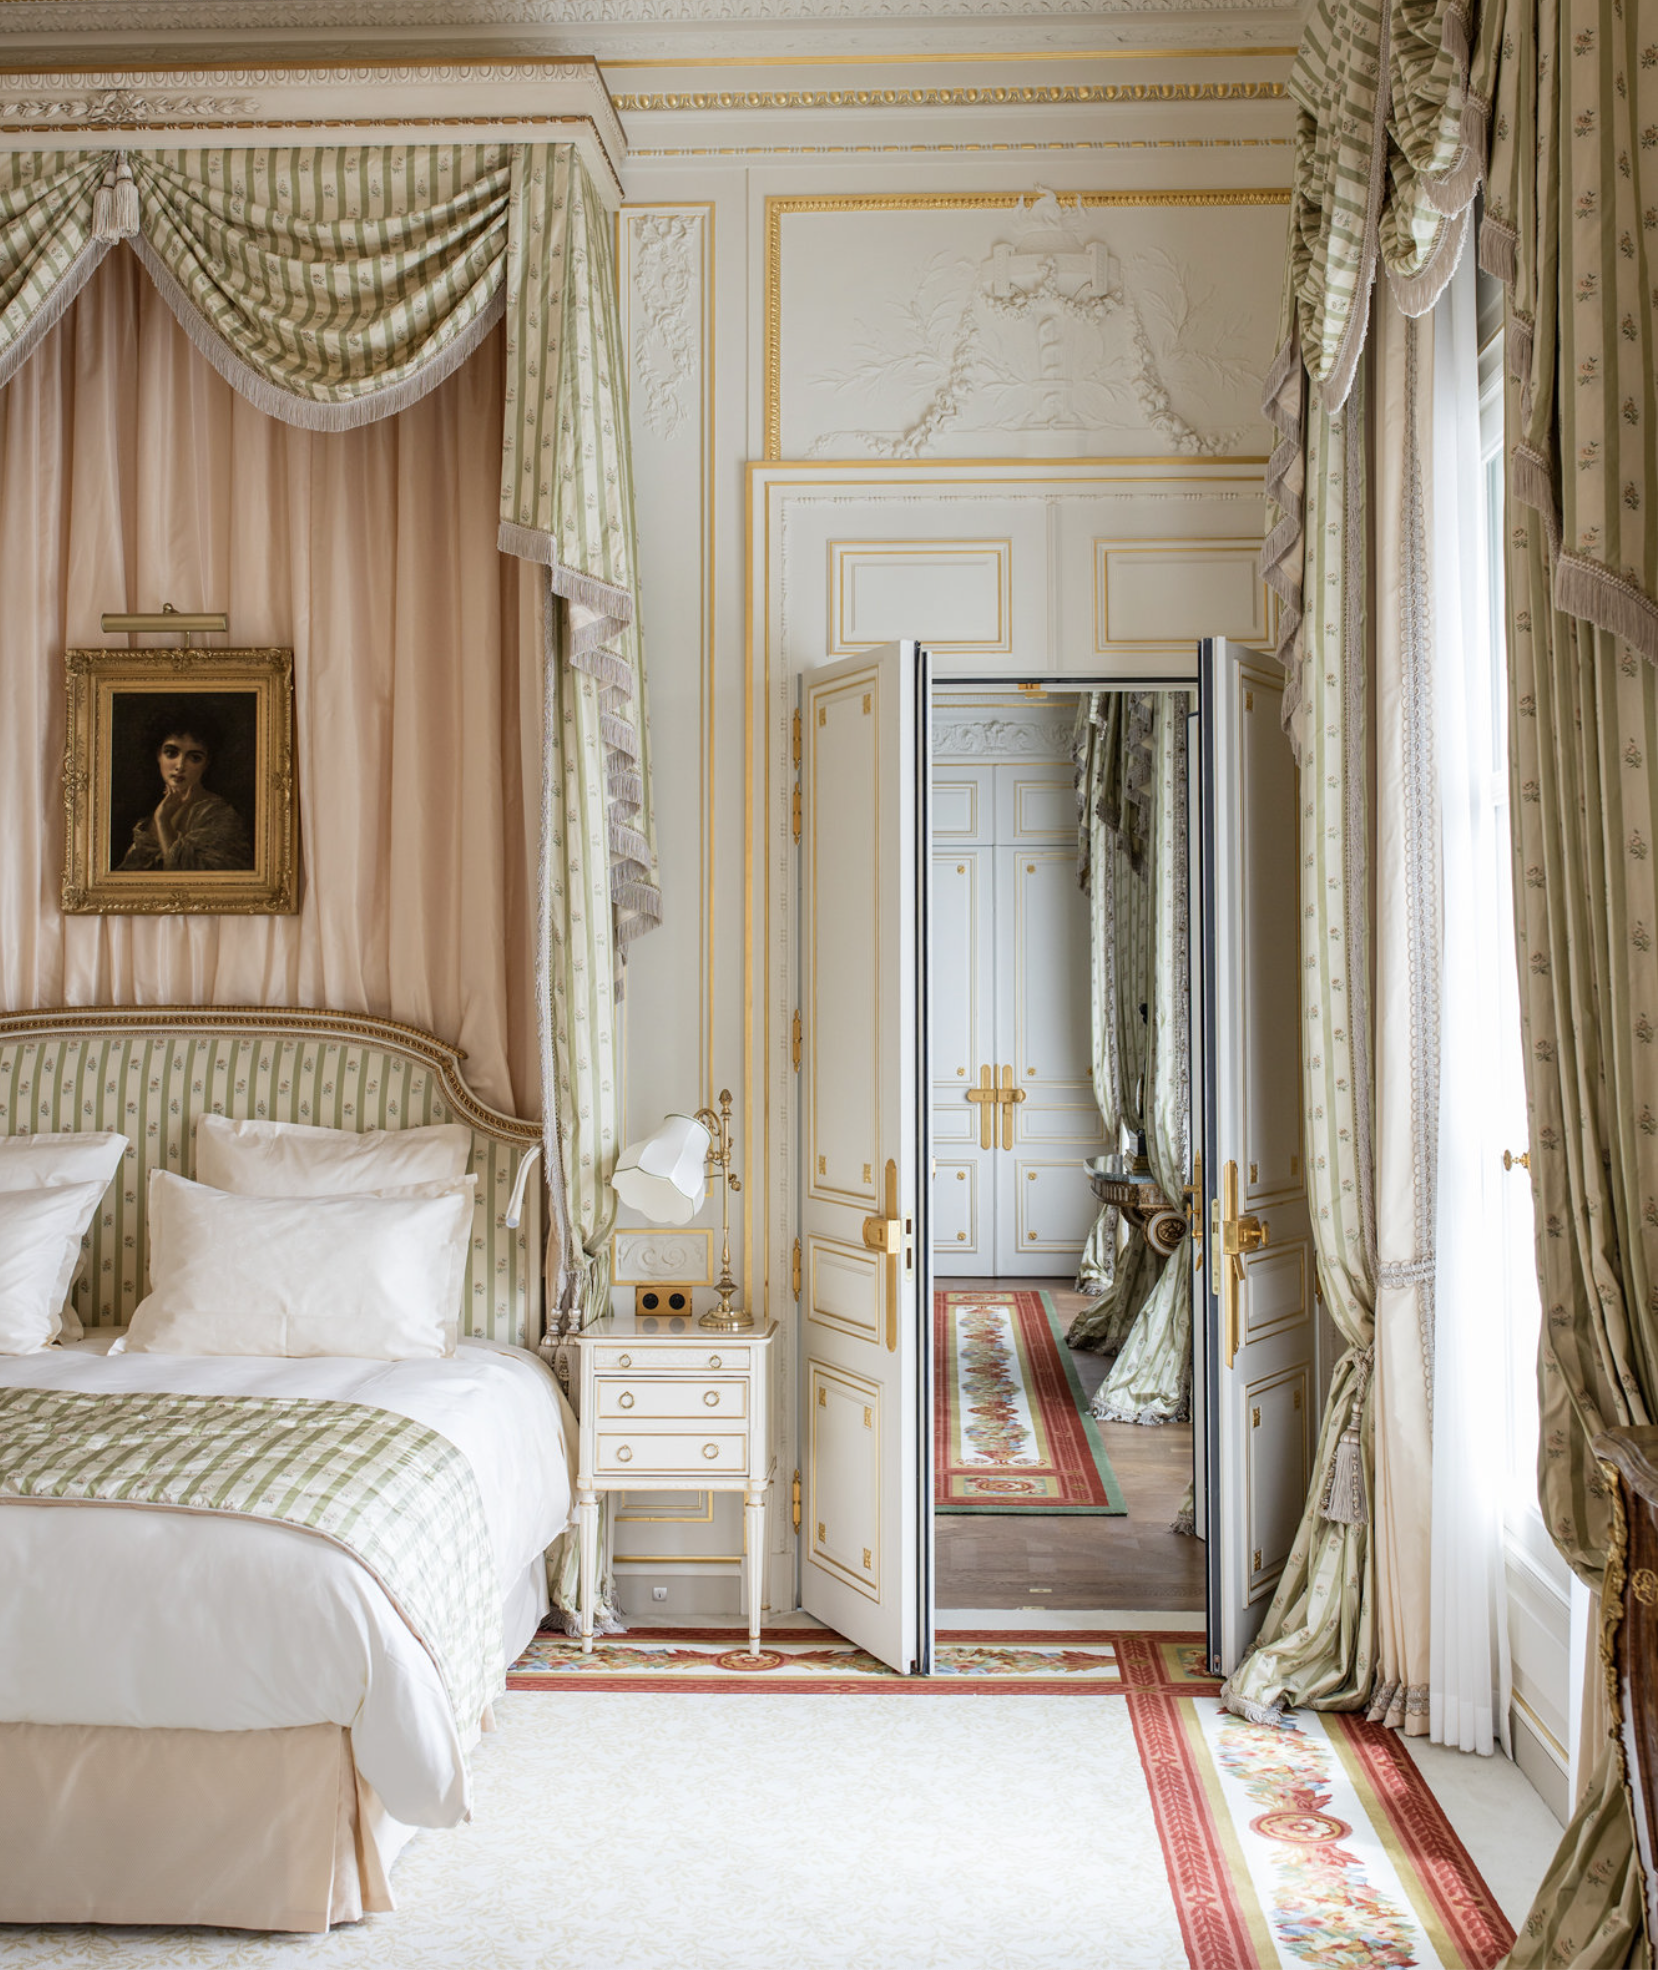 The romantic, feminine Suite Vendome at Ritz Paris with a sage, lilac and pink canopy bed inspired by Marie Antoinette, white and gold Louis XV furniture and wall paneling, floral motif curtains and floor-to-ceiling windows